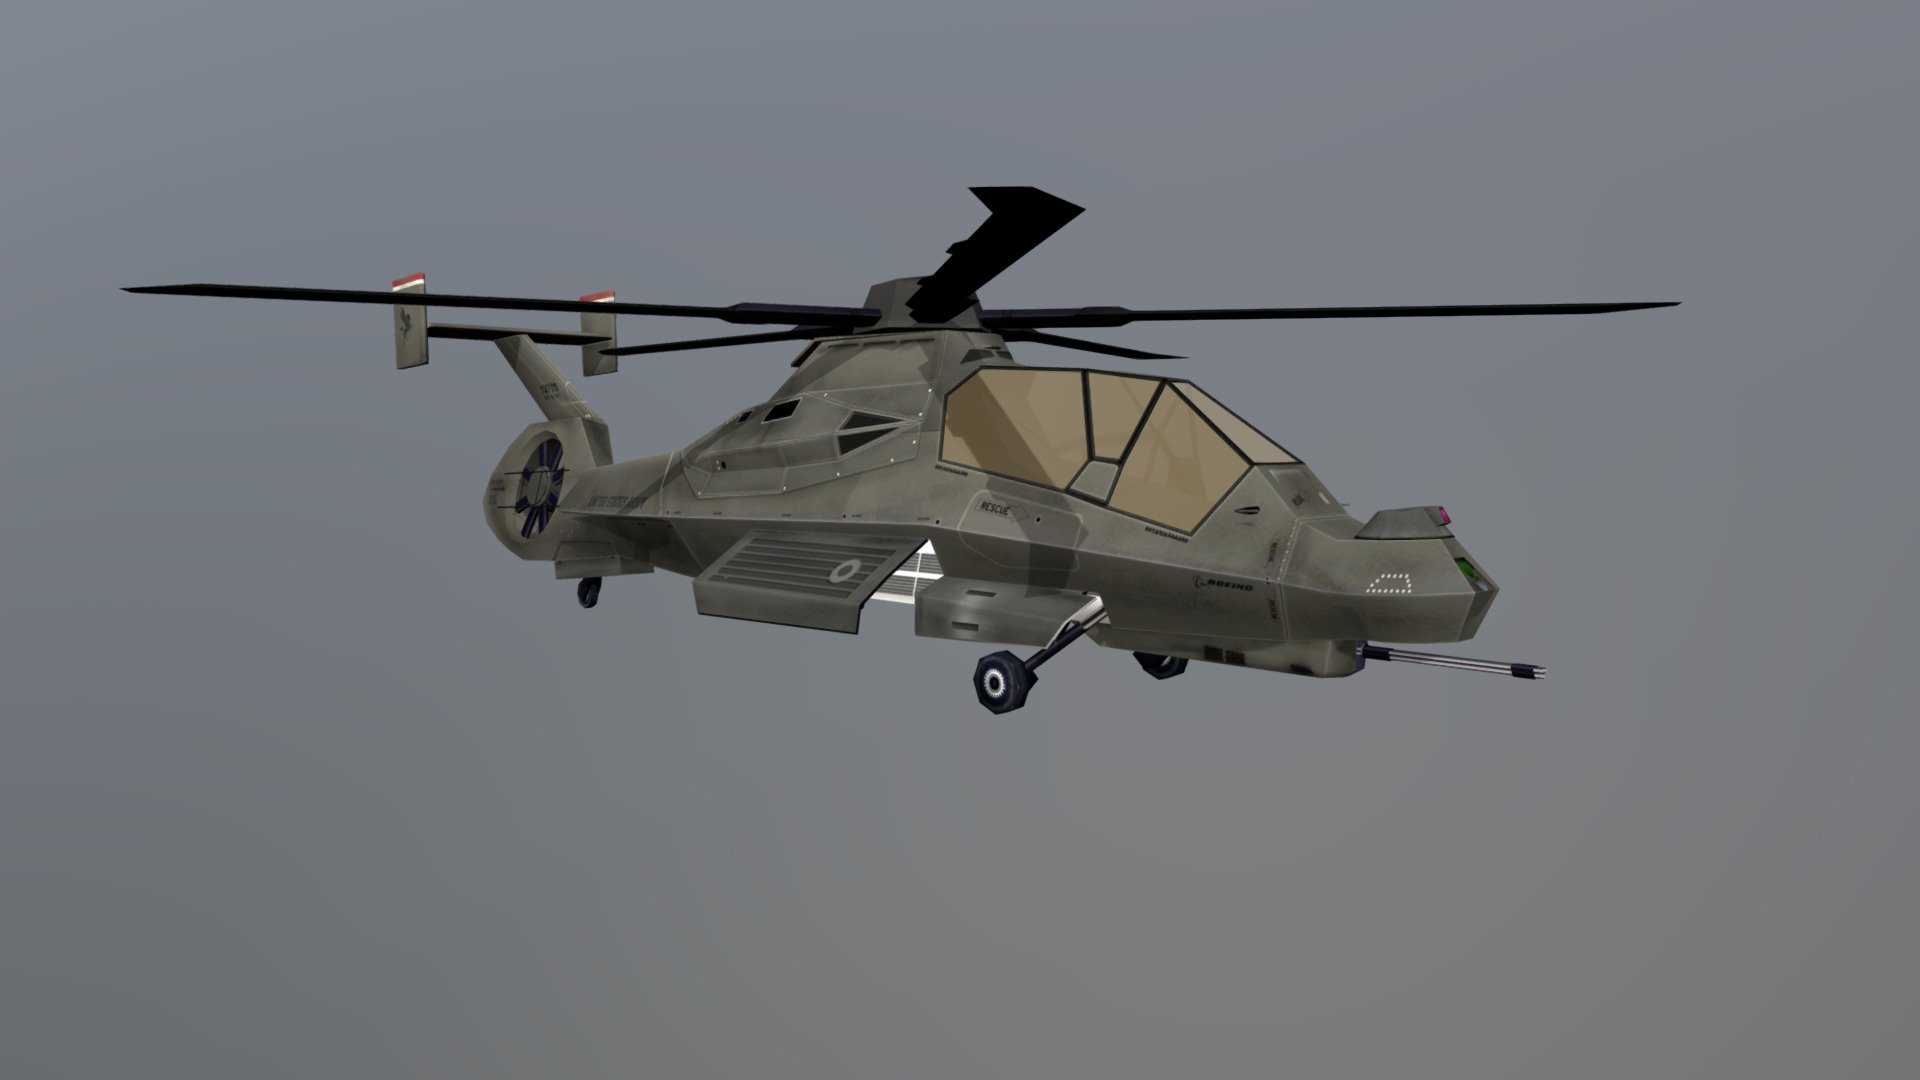 The Boeing–Sikorsky RAH-66 Comanche is an American stealth armed reconnaissance and attack helicopter designed for the United States Army. Following decades of development, the RAH-66 program was canceled in 2004 before mass production began, by which point nearly US$7 billion had been spent on the program 3d model